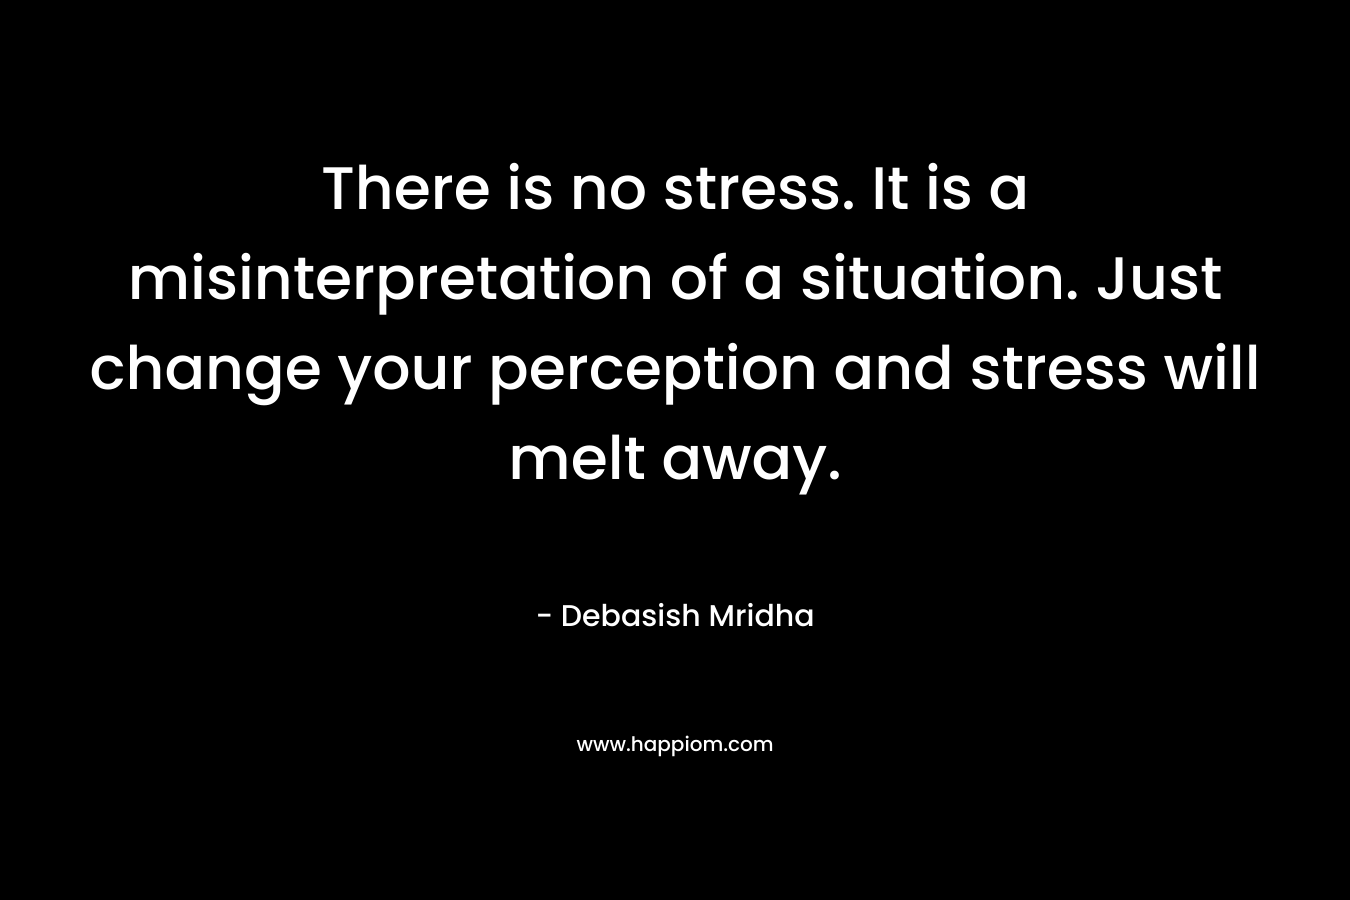 There is no stress. It is a misinterpretation of a situation. Just change your perception and stress will melt away.